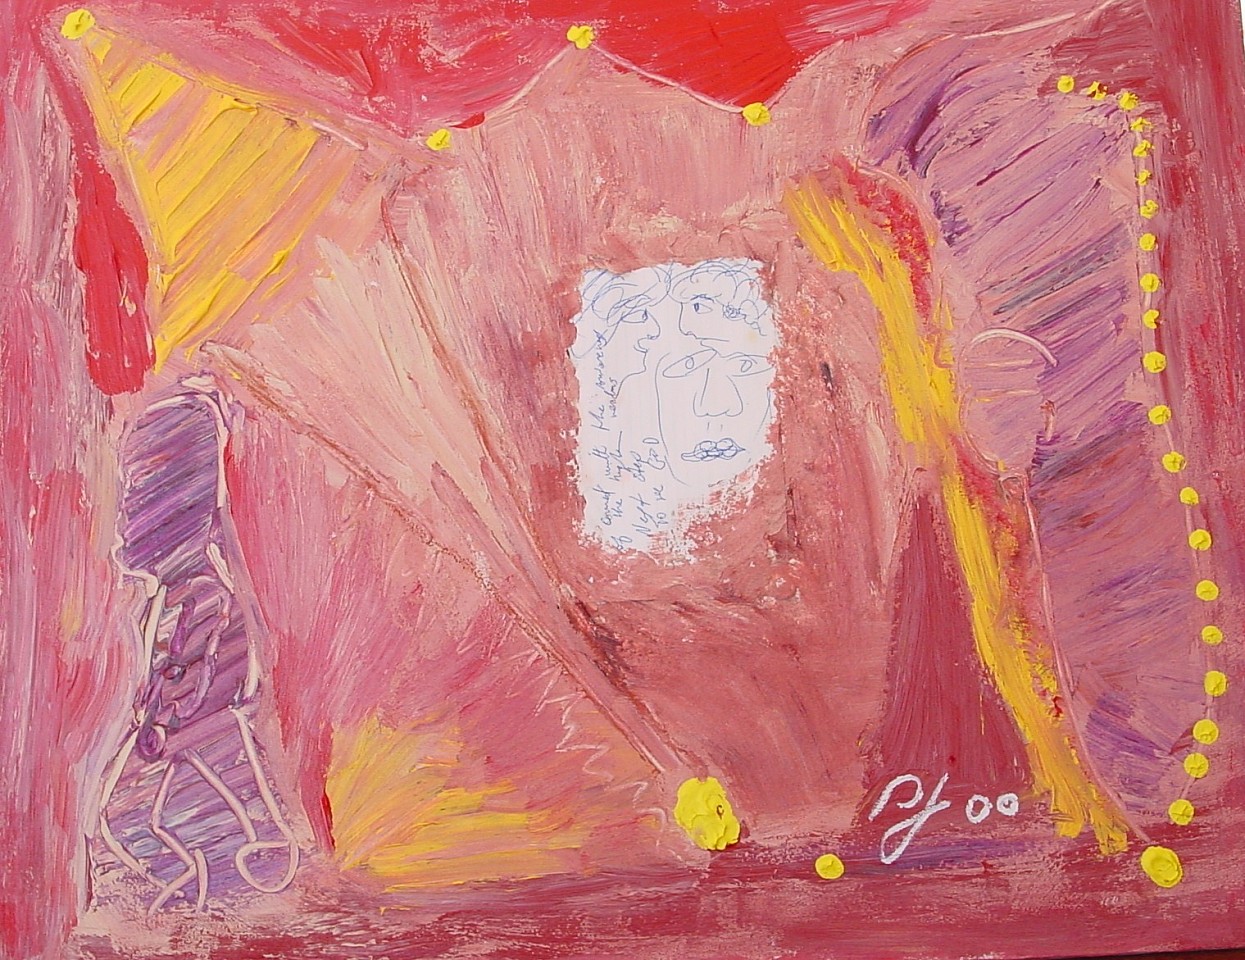 Diego Jacobson, Enlightenment, 2000
Mixed Media on Canvas, 24 x 30 in. (61 x 76.2 cm)
0037